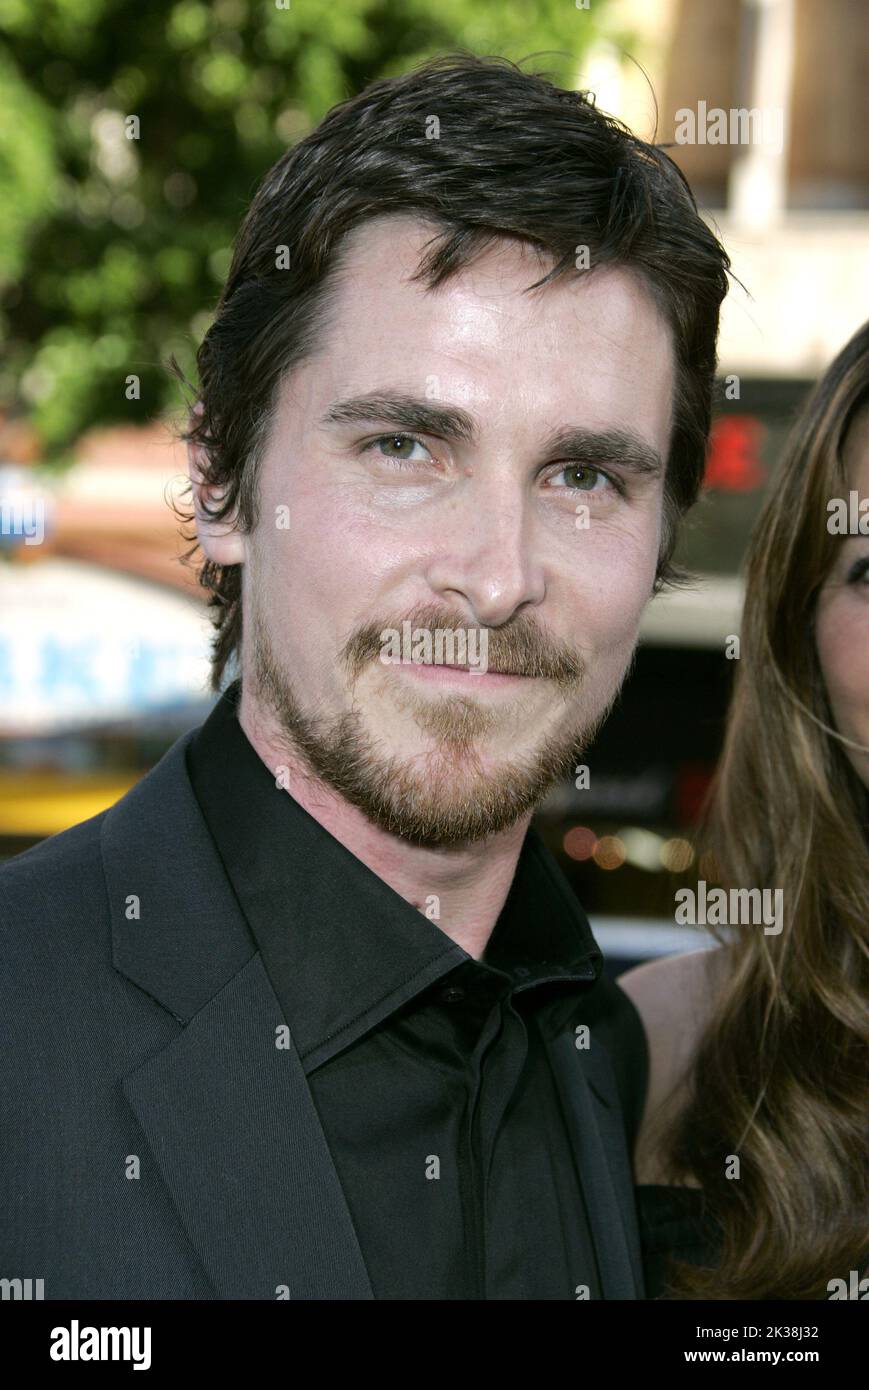 CHRISTIAN BALE ACTOR BATMAN BEGINS CHINESE THEATRE, HOLLYWOOD LOS ANGELES, USA 06/06/2005 LAM51589 Stock Photo